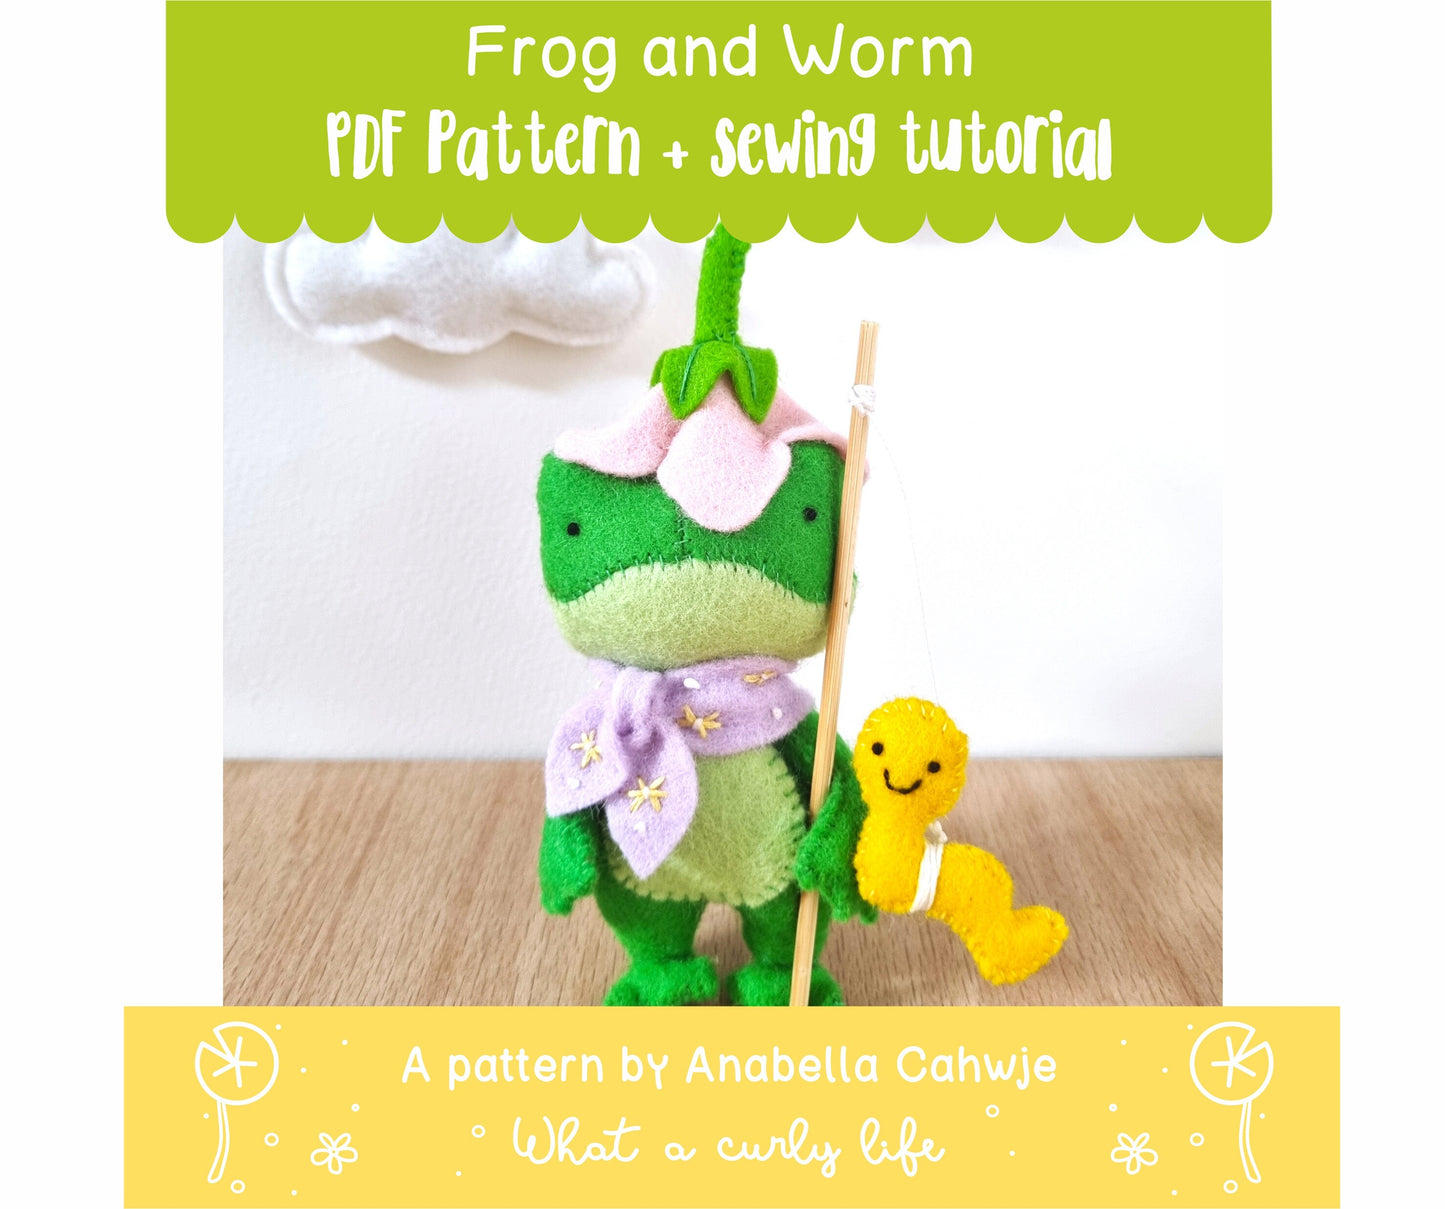 Frog and worm PDF Pattern and tutorial